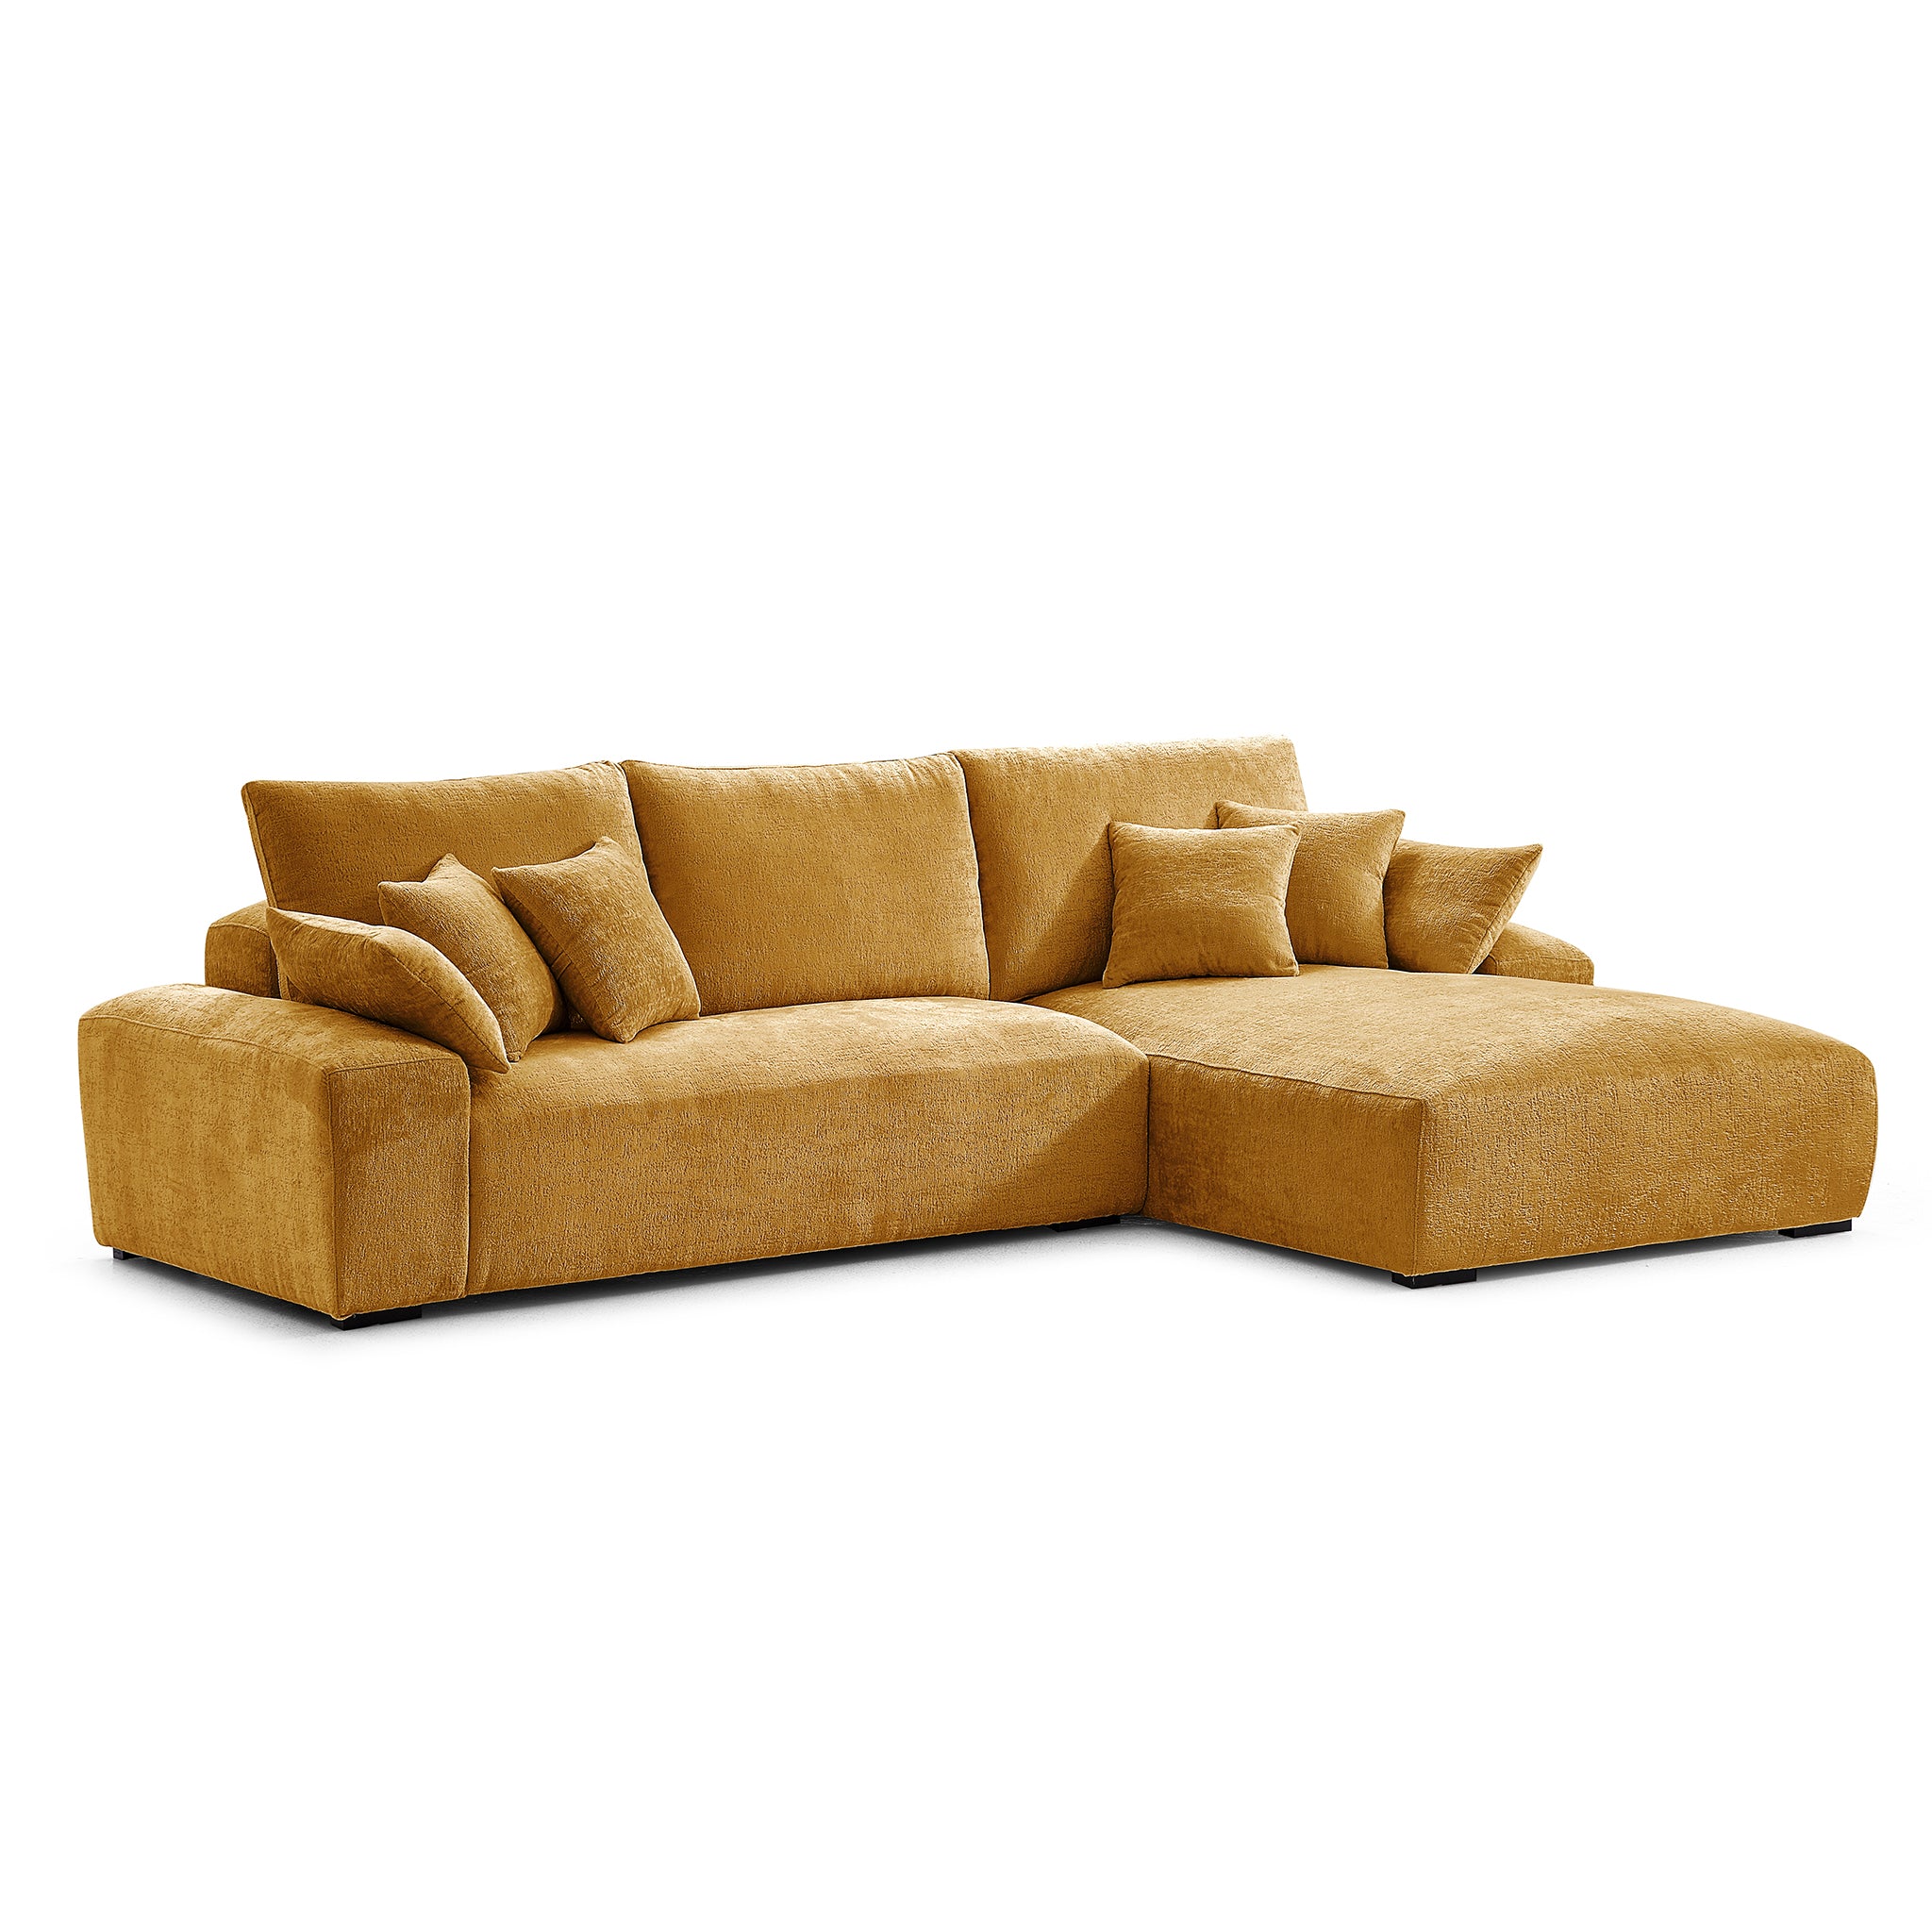 The Empress Yellow Sectional